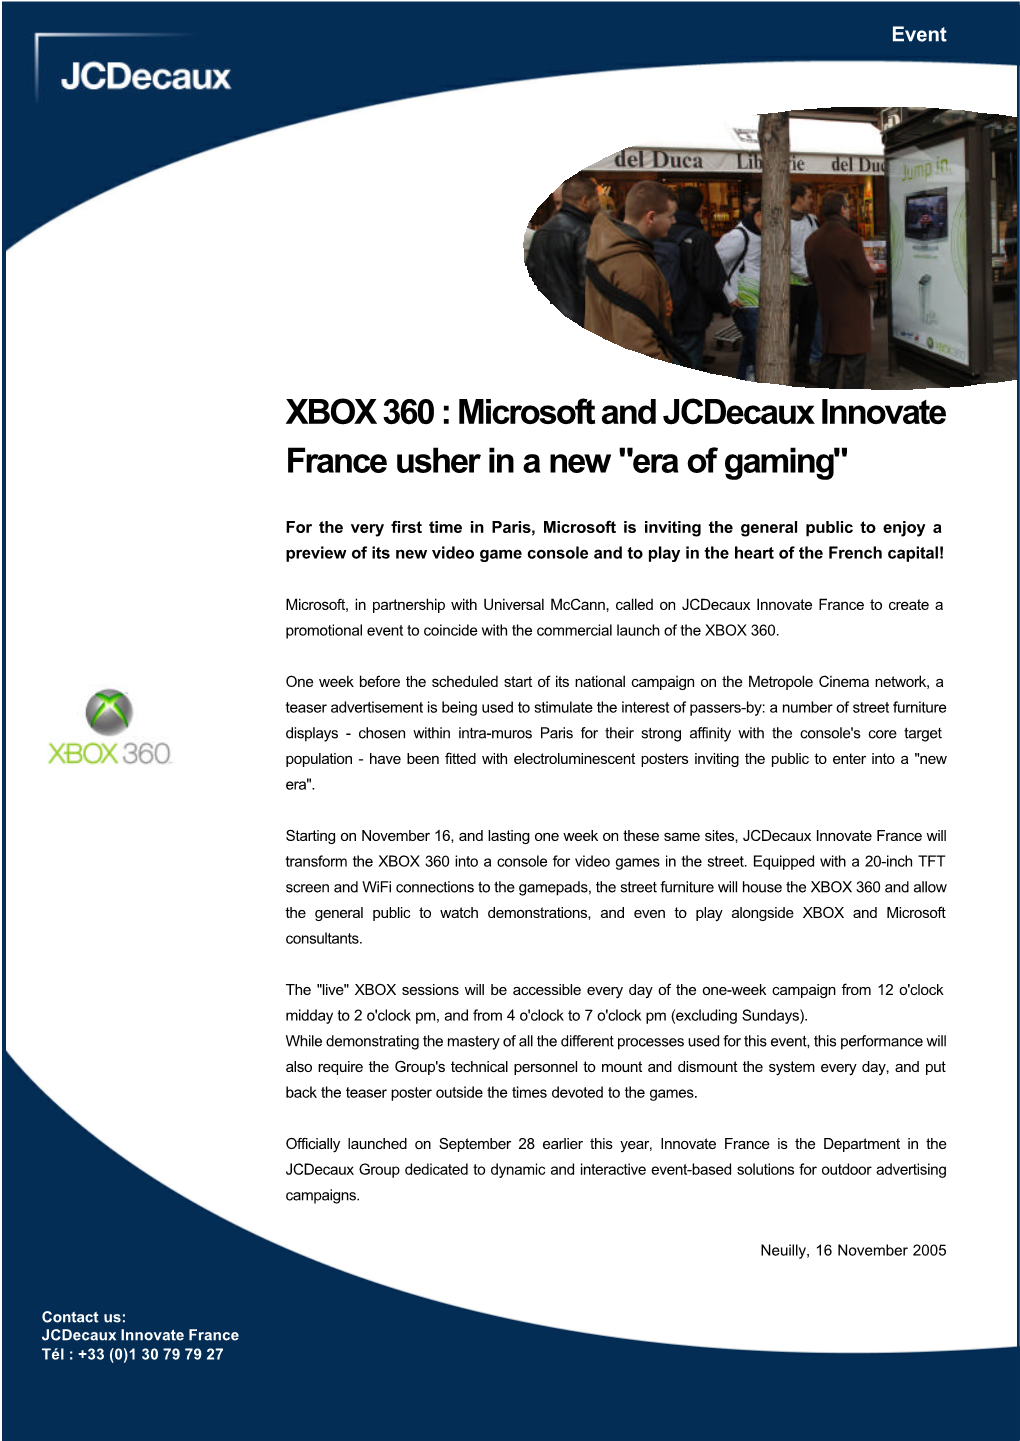 XBOX 360 : Microsoft and Jcdecaux Innovate France Usher in a New "Era of Gaming"